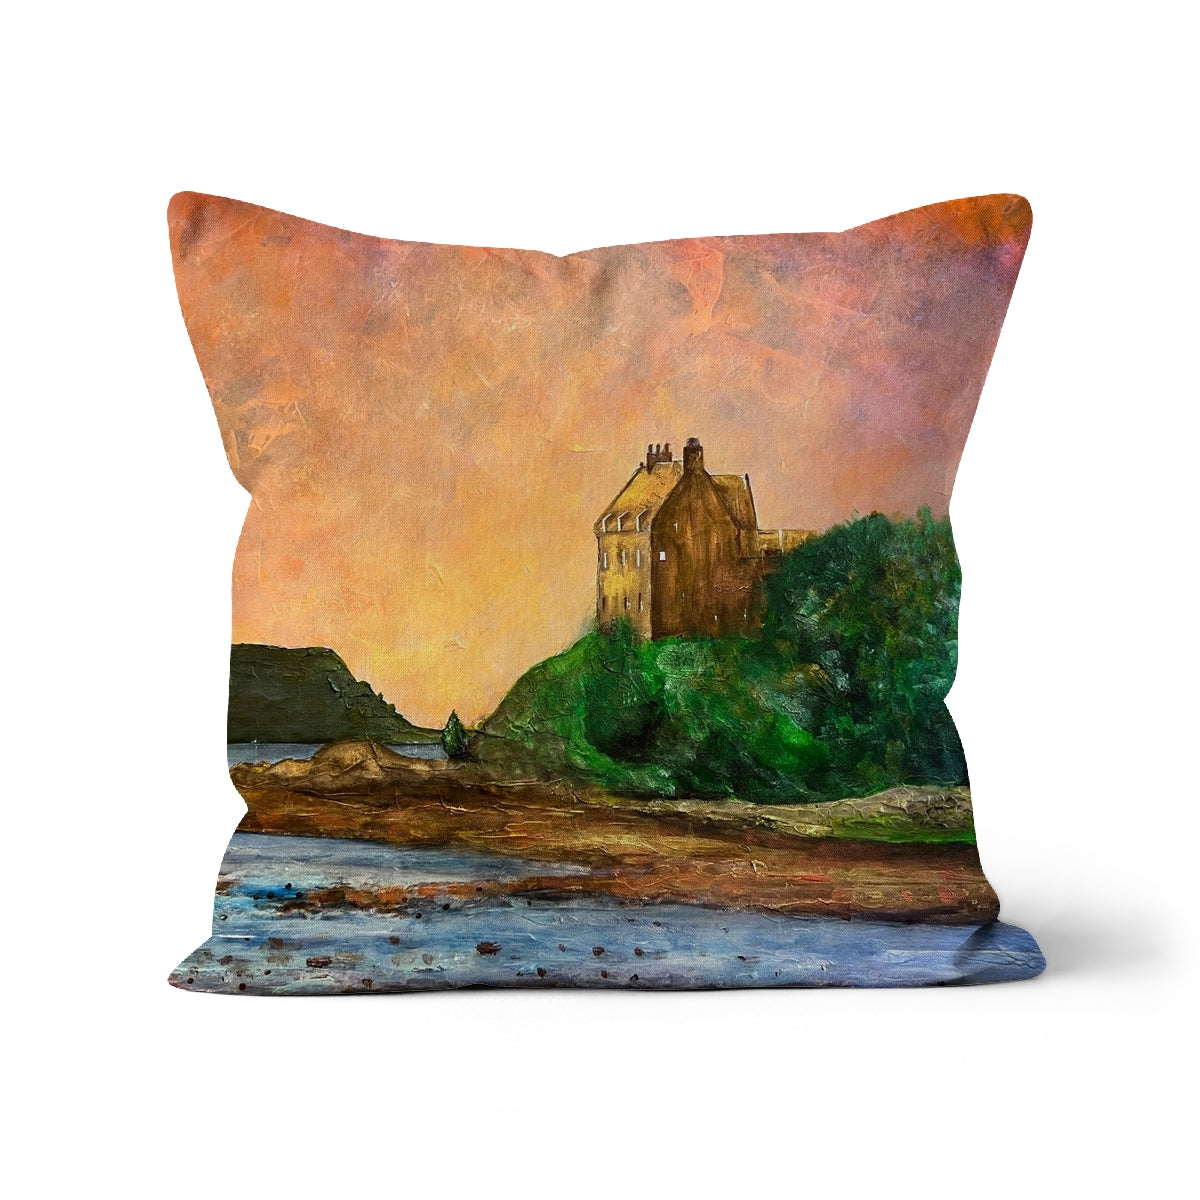 Duntrune Castle Art Gifts Cushion-Cushions-Historic & Iconic Scotland Art Gallery-Canvas-18"x18"-Paintings, Prints, Homeware, Art Gifts From Scotland By Scottish Artist Kevin Hunter